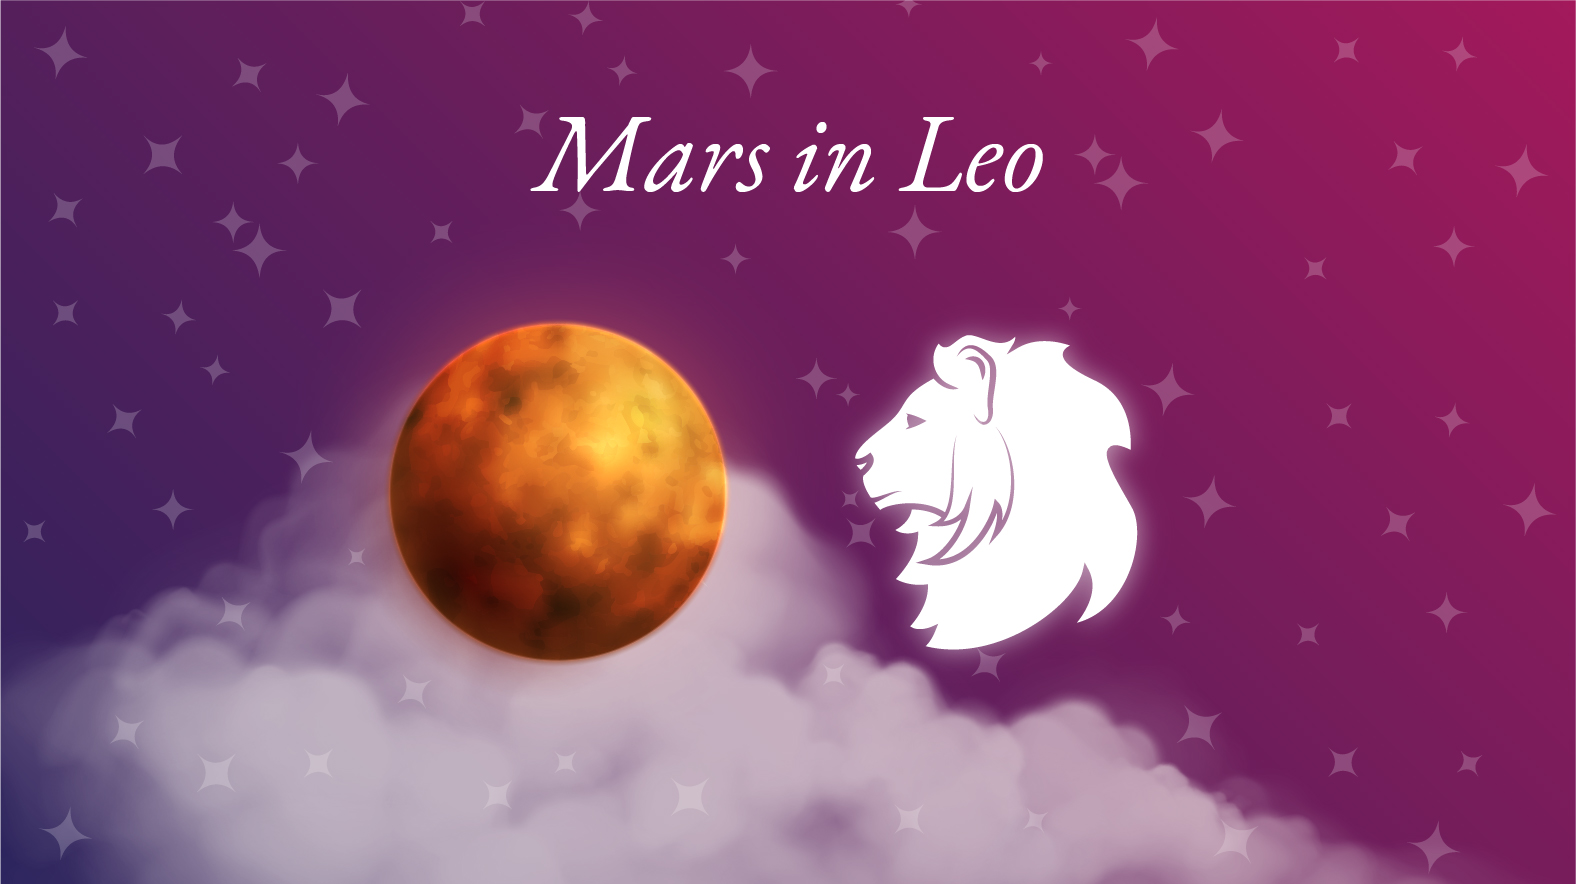 Mars in Leo Meaning